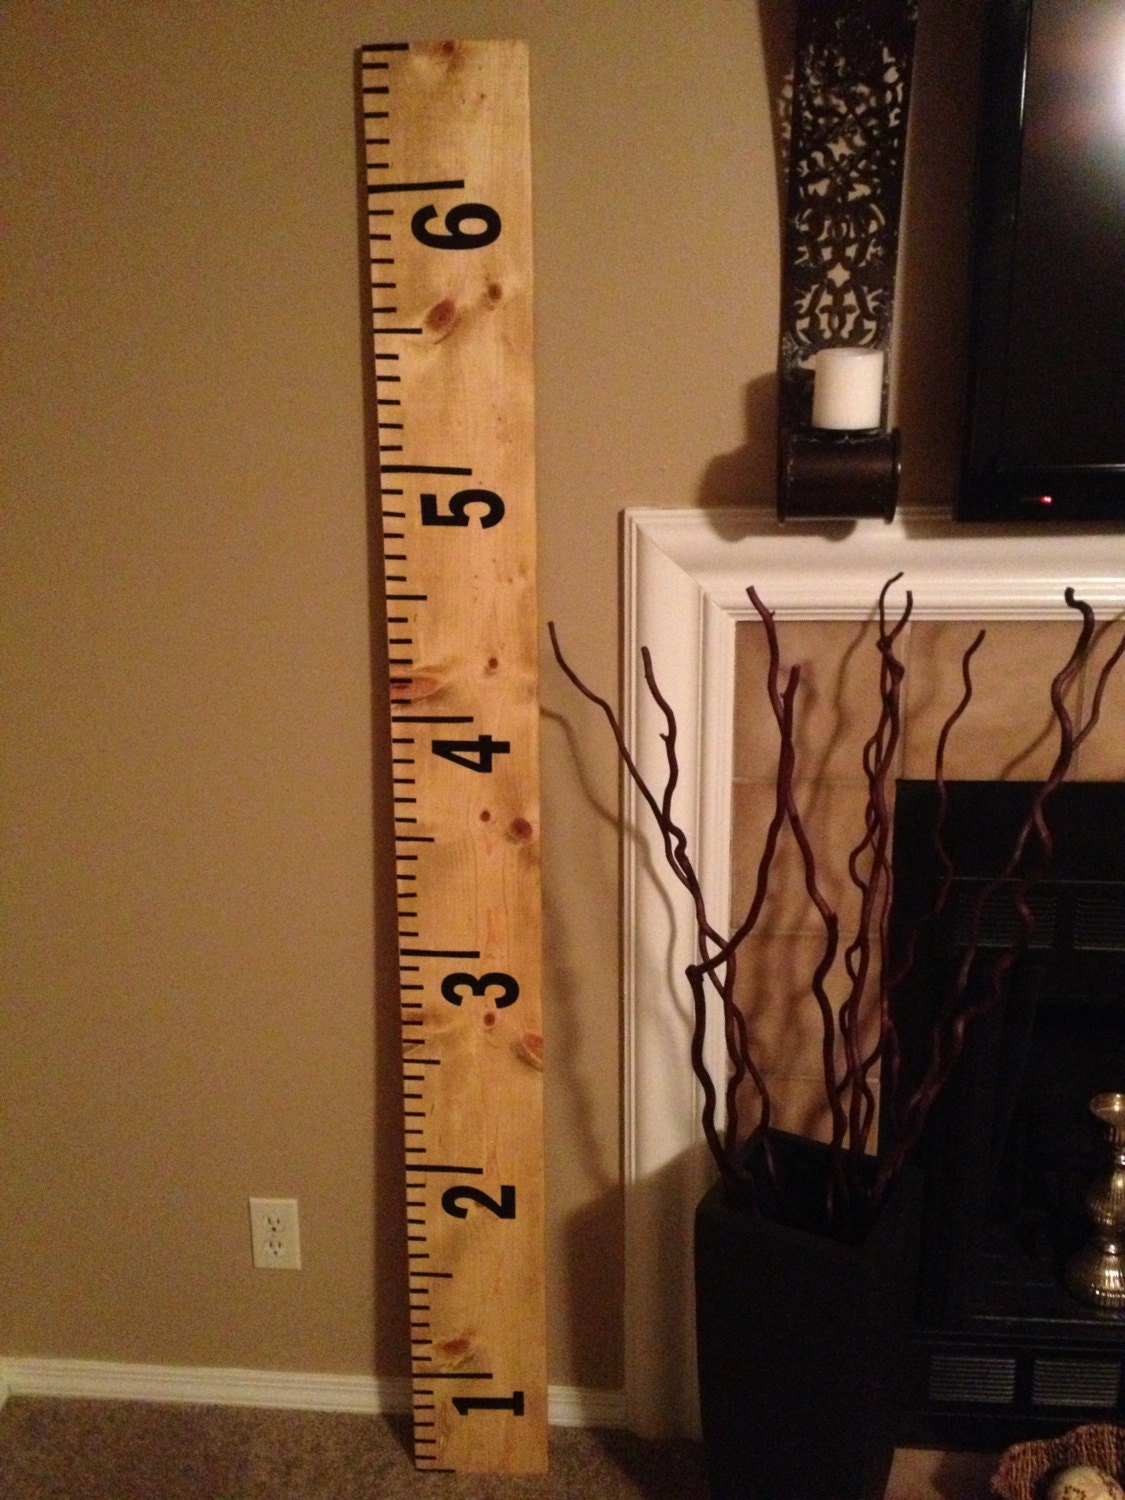 pic of life sized ruler